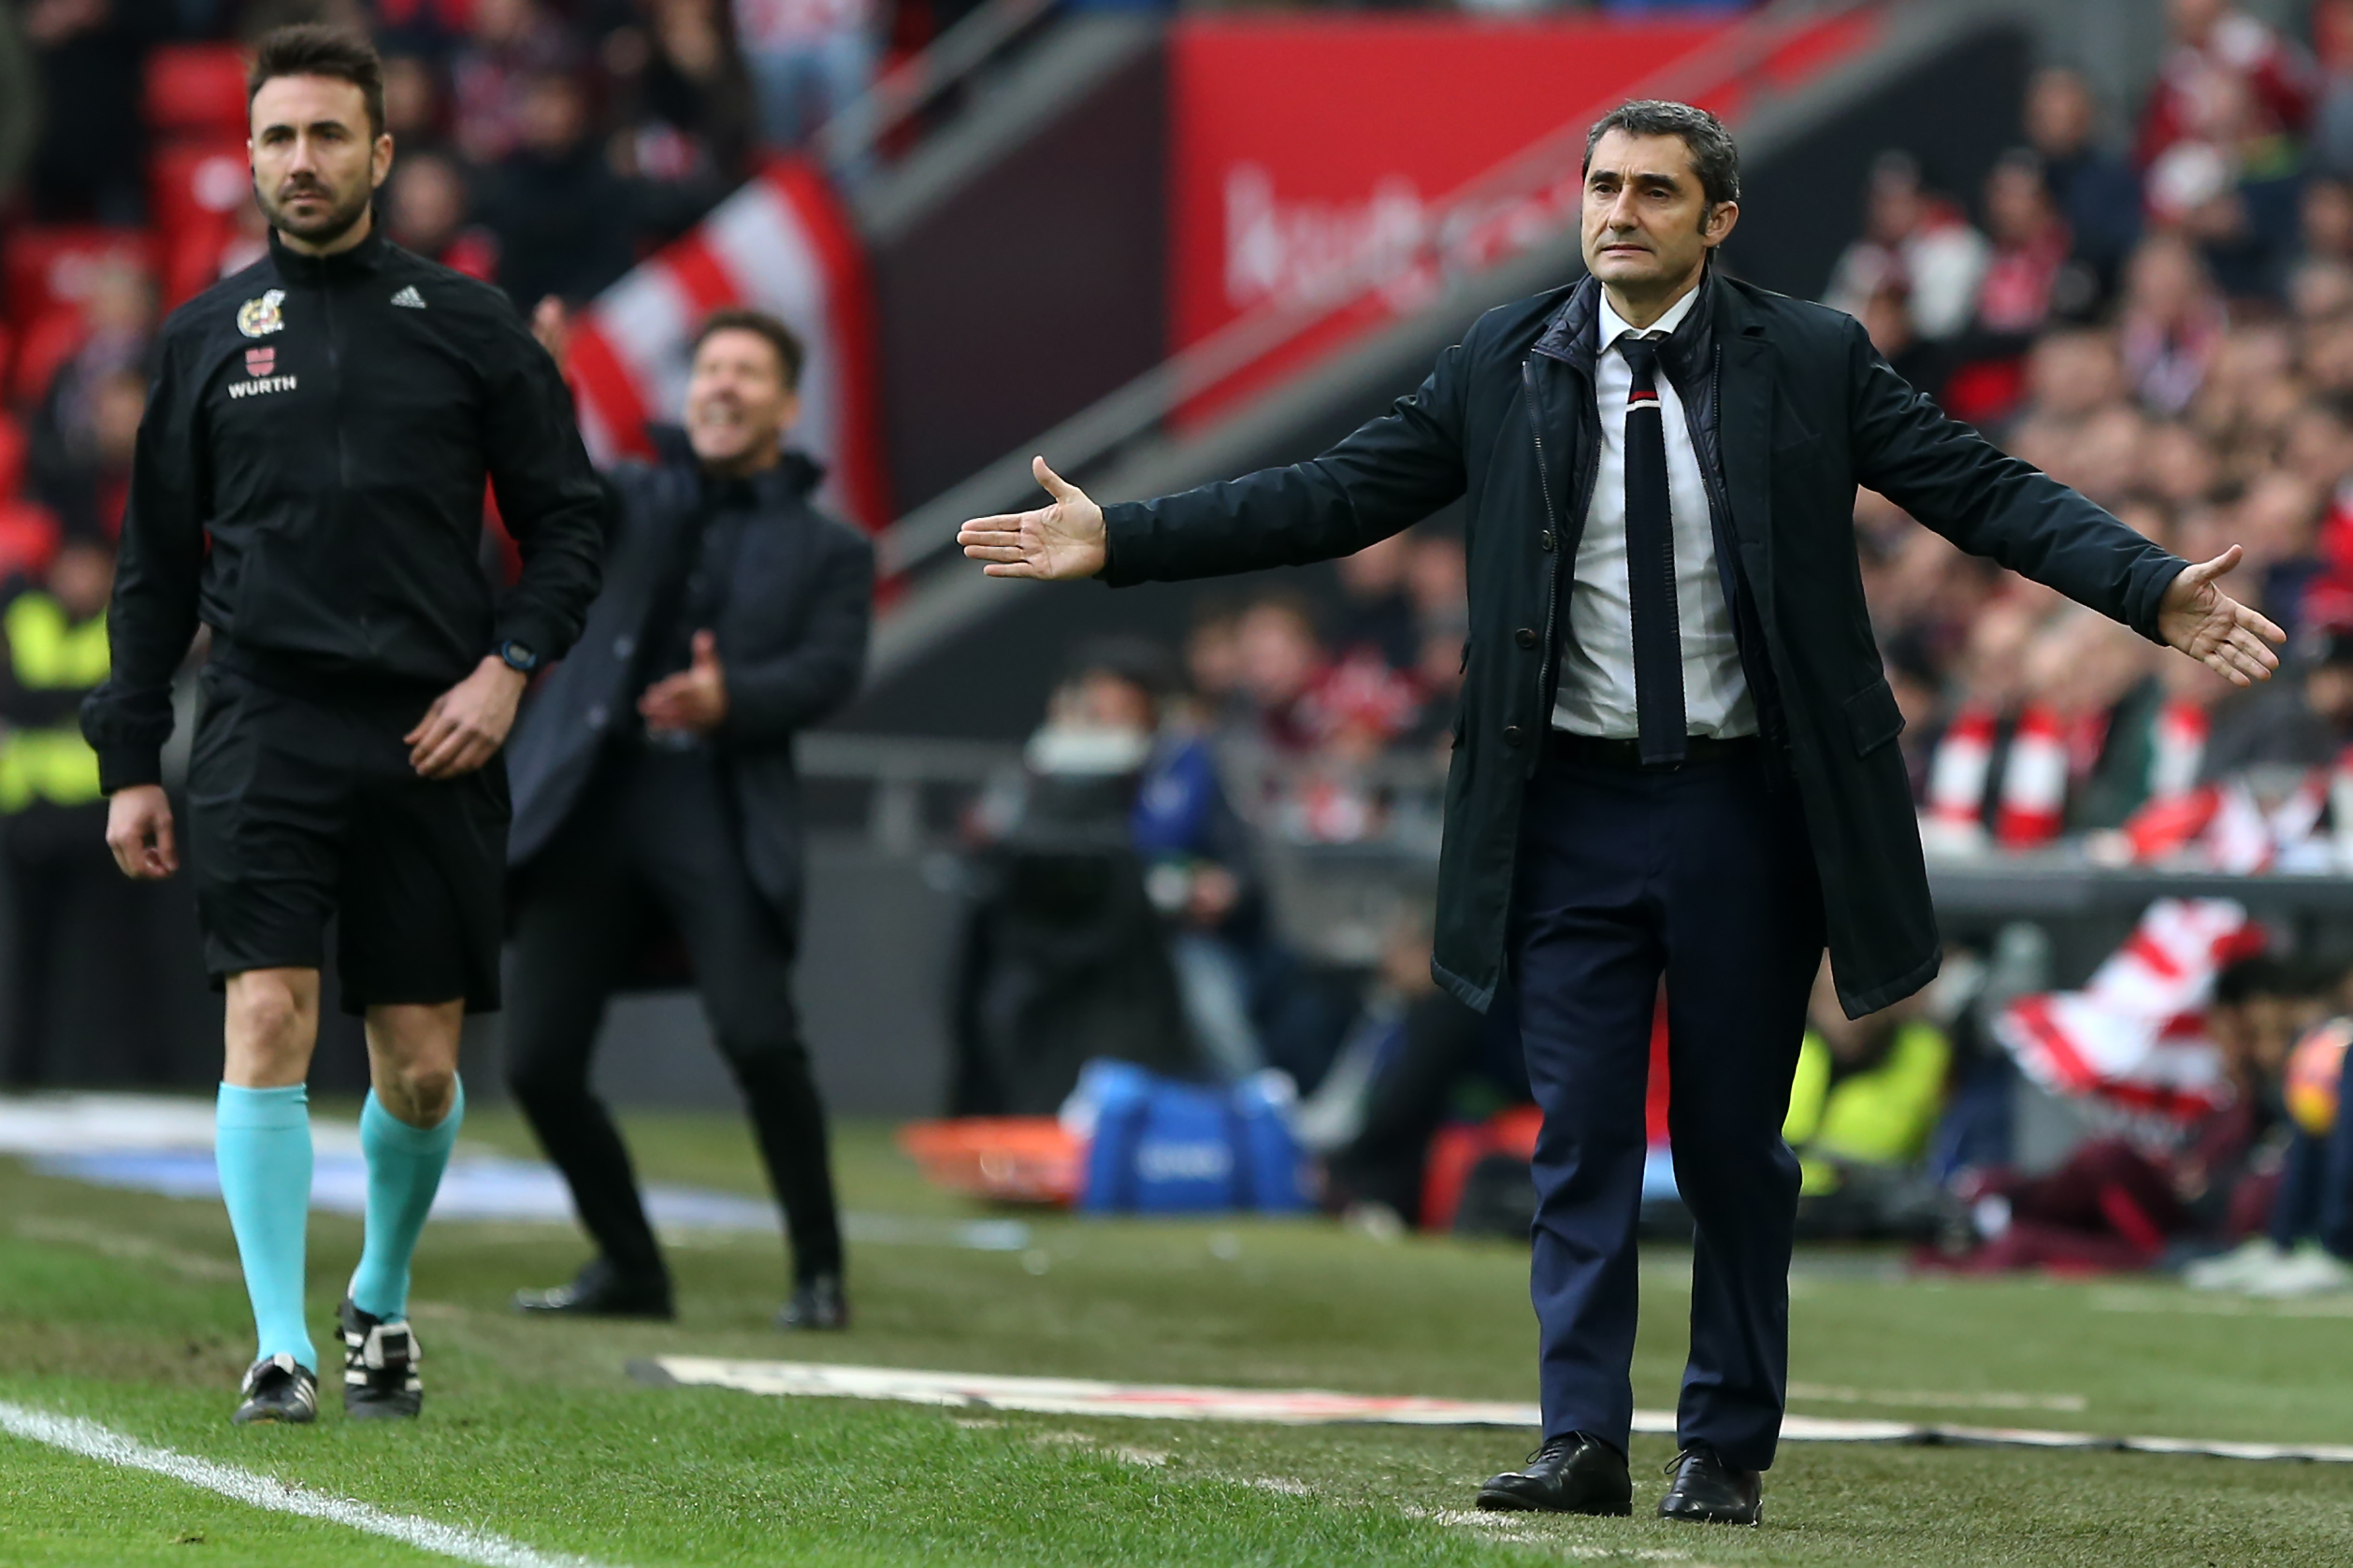 Athletic Bilbao's coach Ernesto Valverde (R) gestures during the Spanish league football match Athletic Club Bilbao vs Club Atletico de Madrid at the San Mames stadium in Bilbao on January 22, 2017. / AFP / CESAR MANSO        (Photo credit should read CESAR MANSO/AFP/Getty Images)